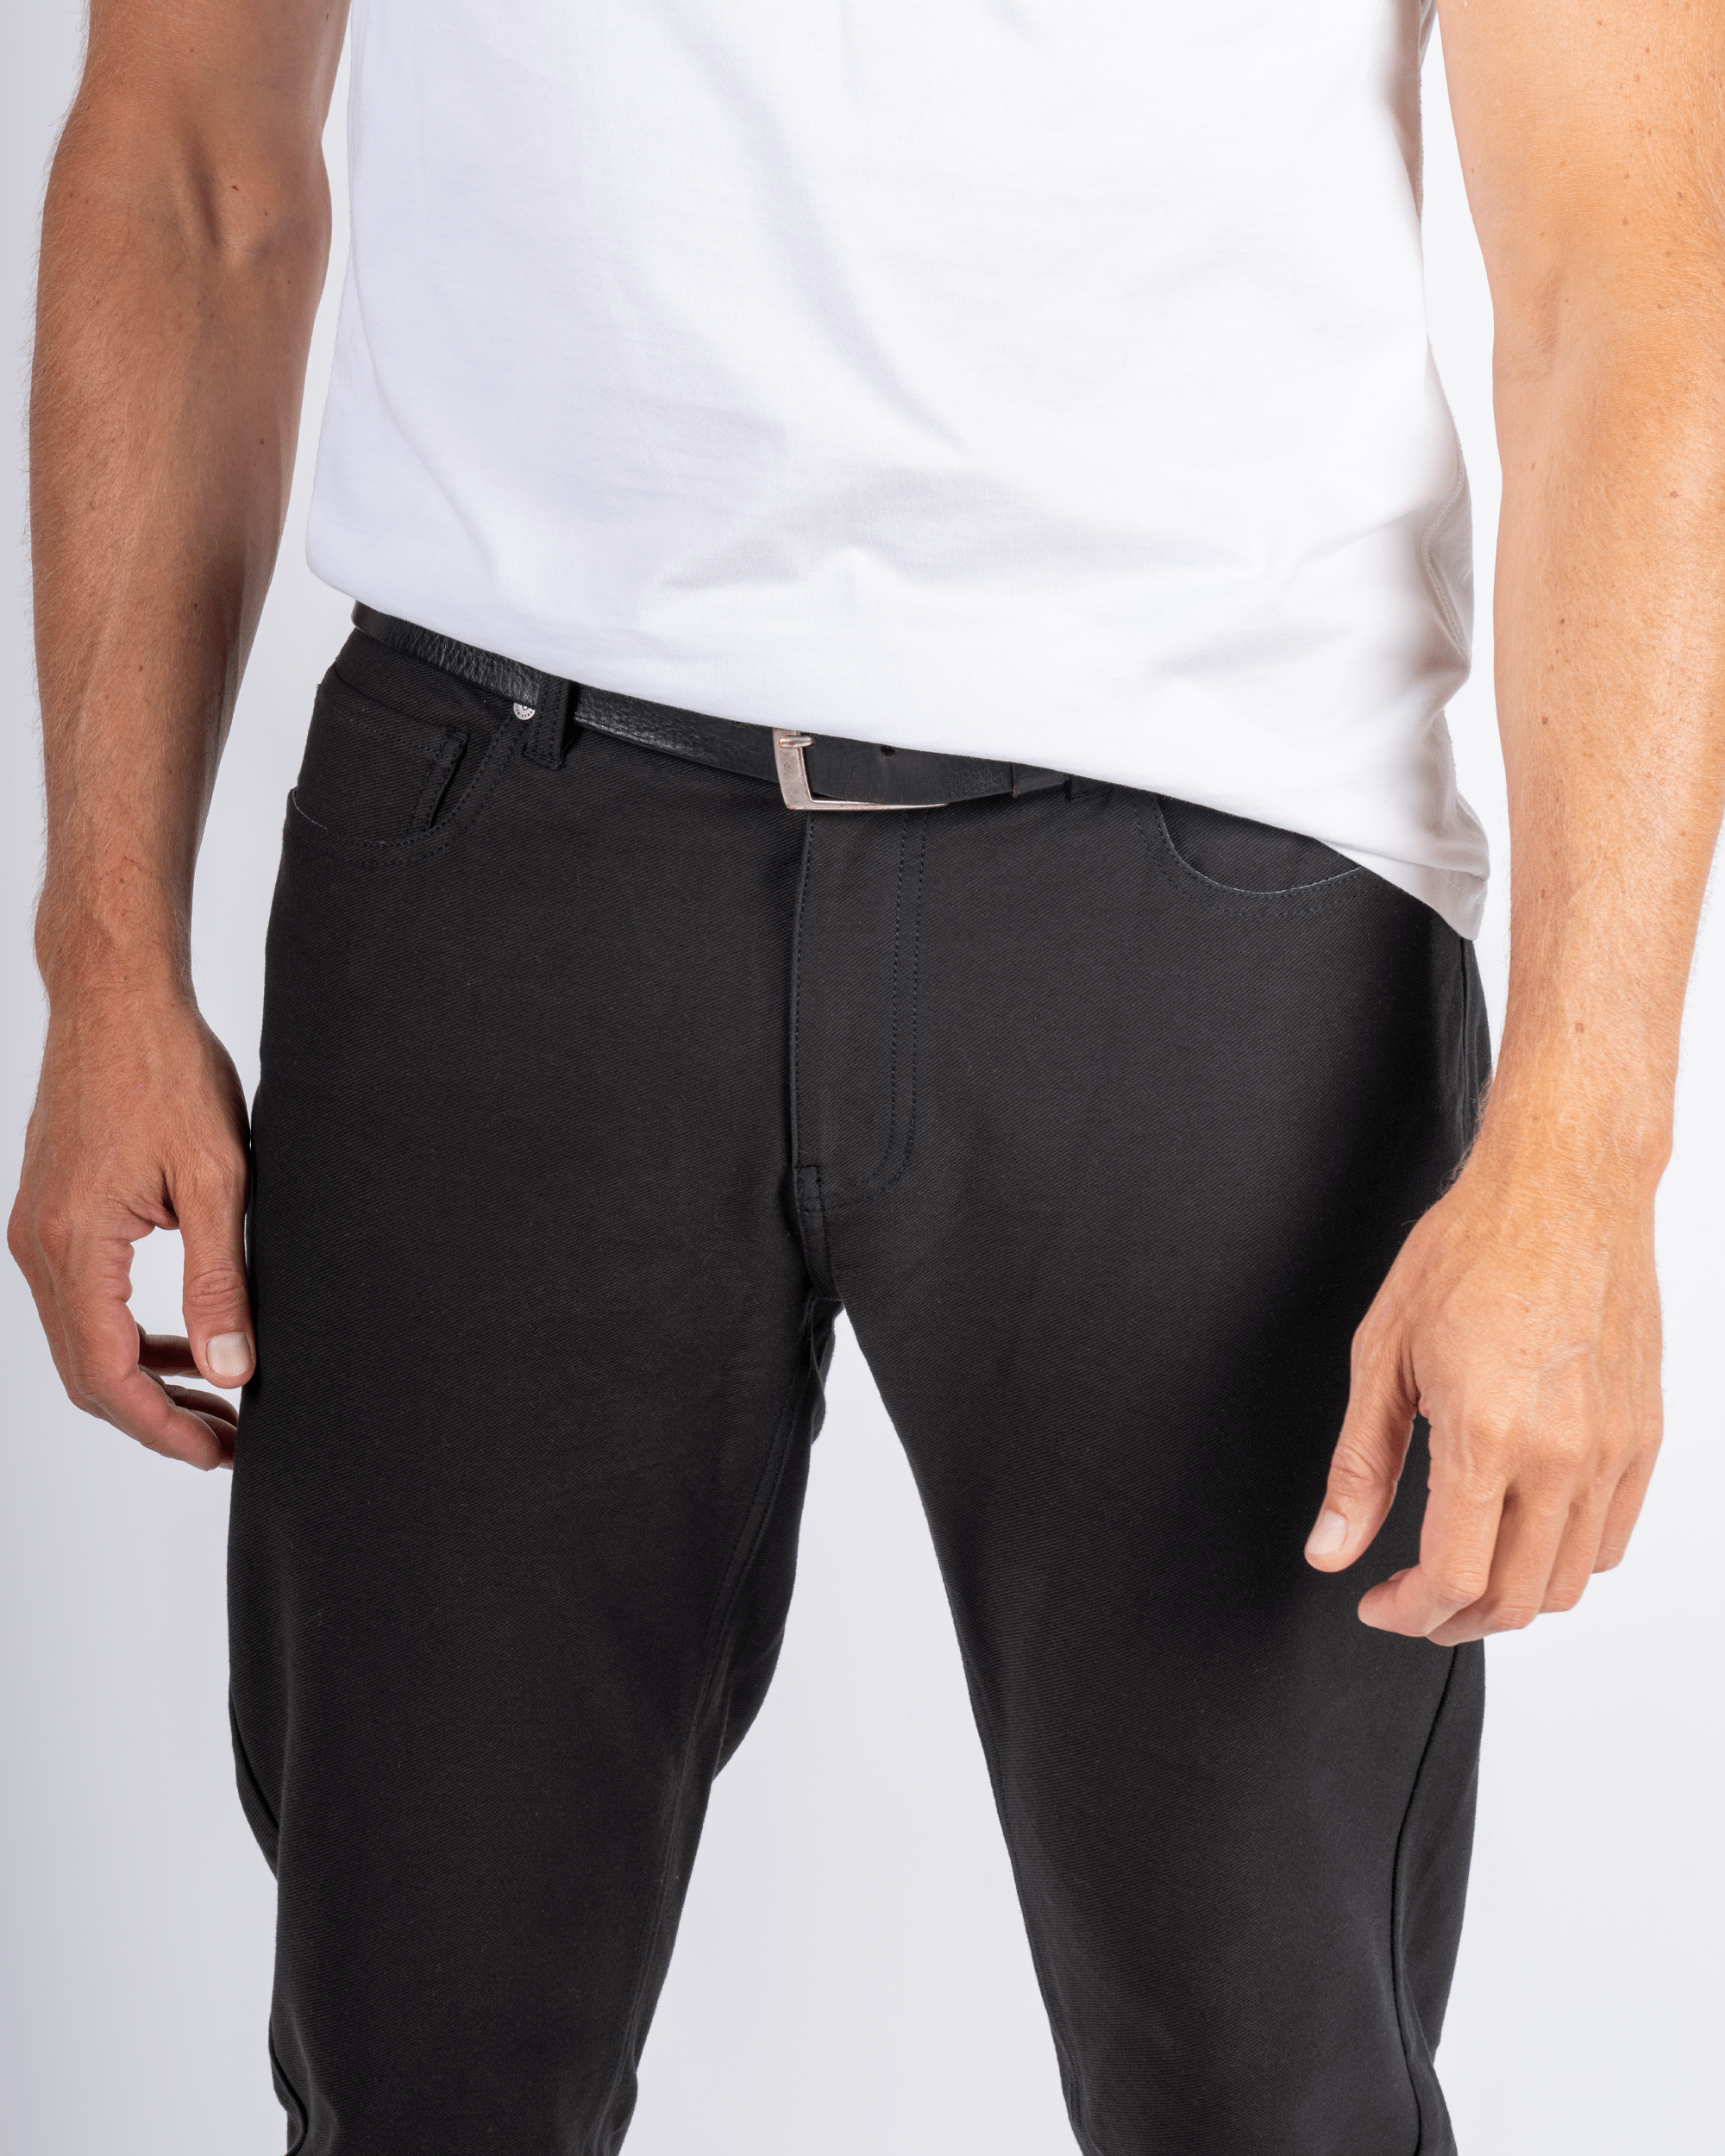 Foreign Rider Co Organic Cotton Black 5 Pocket Pant Front Detail